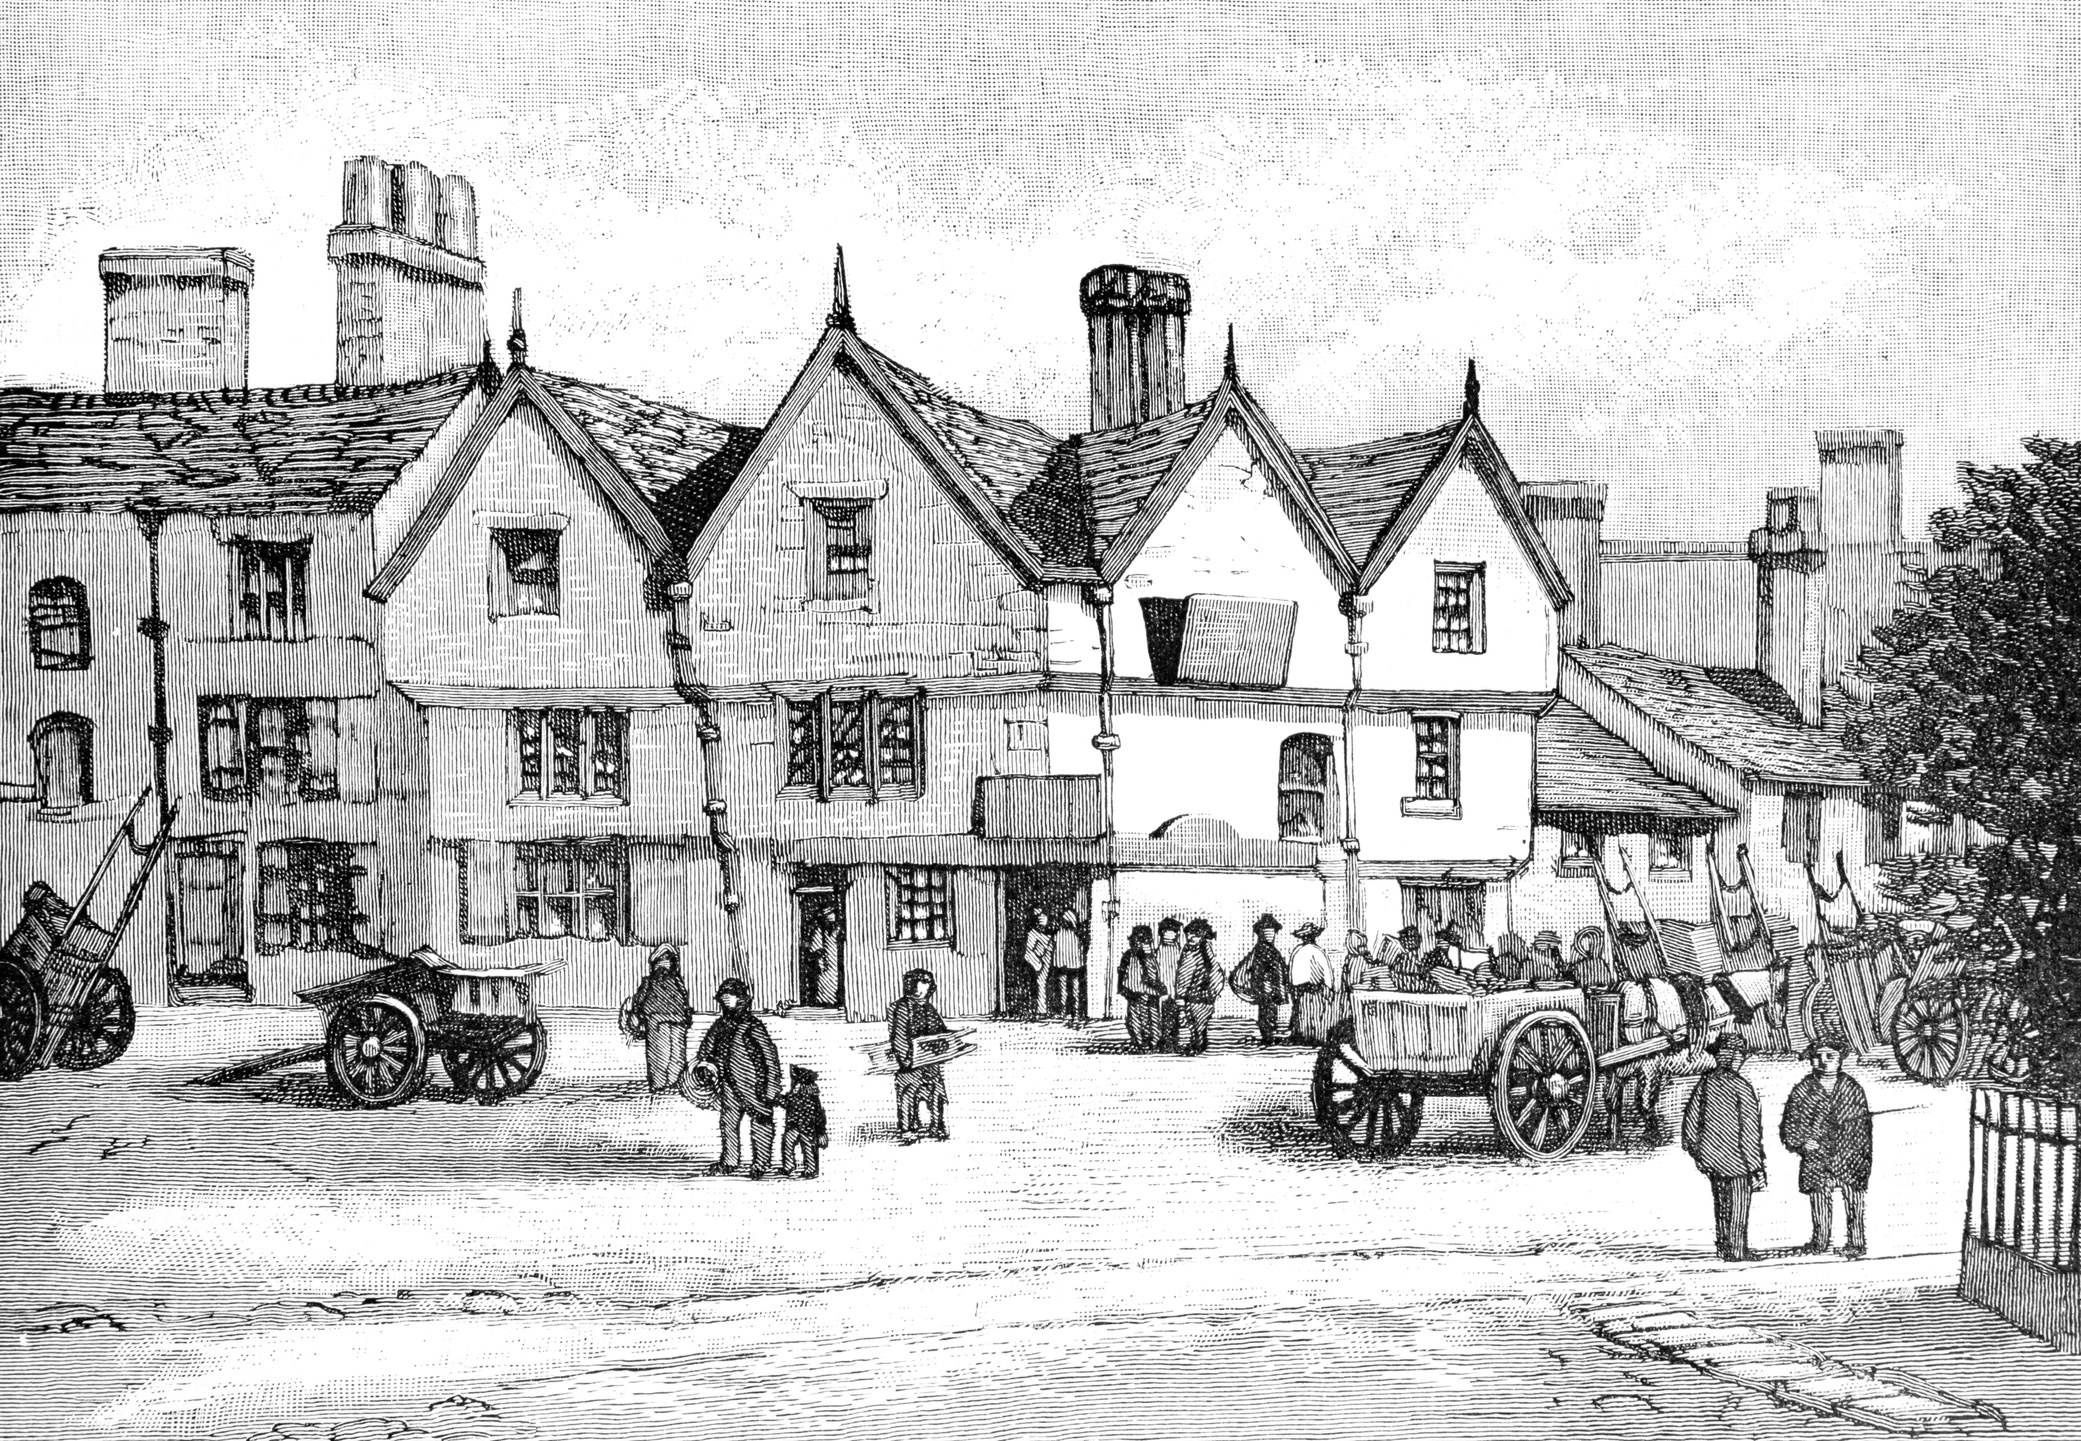 1800s illustration of an old town